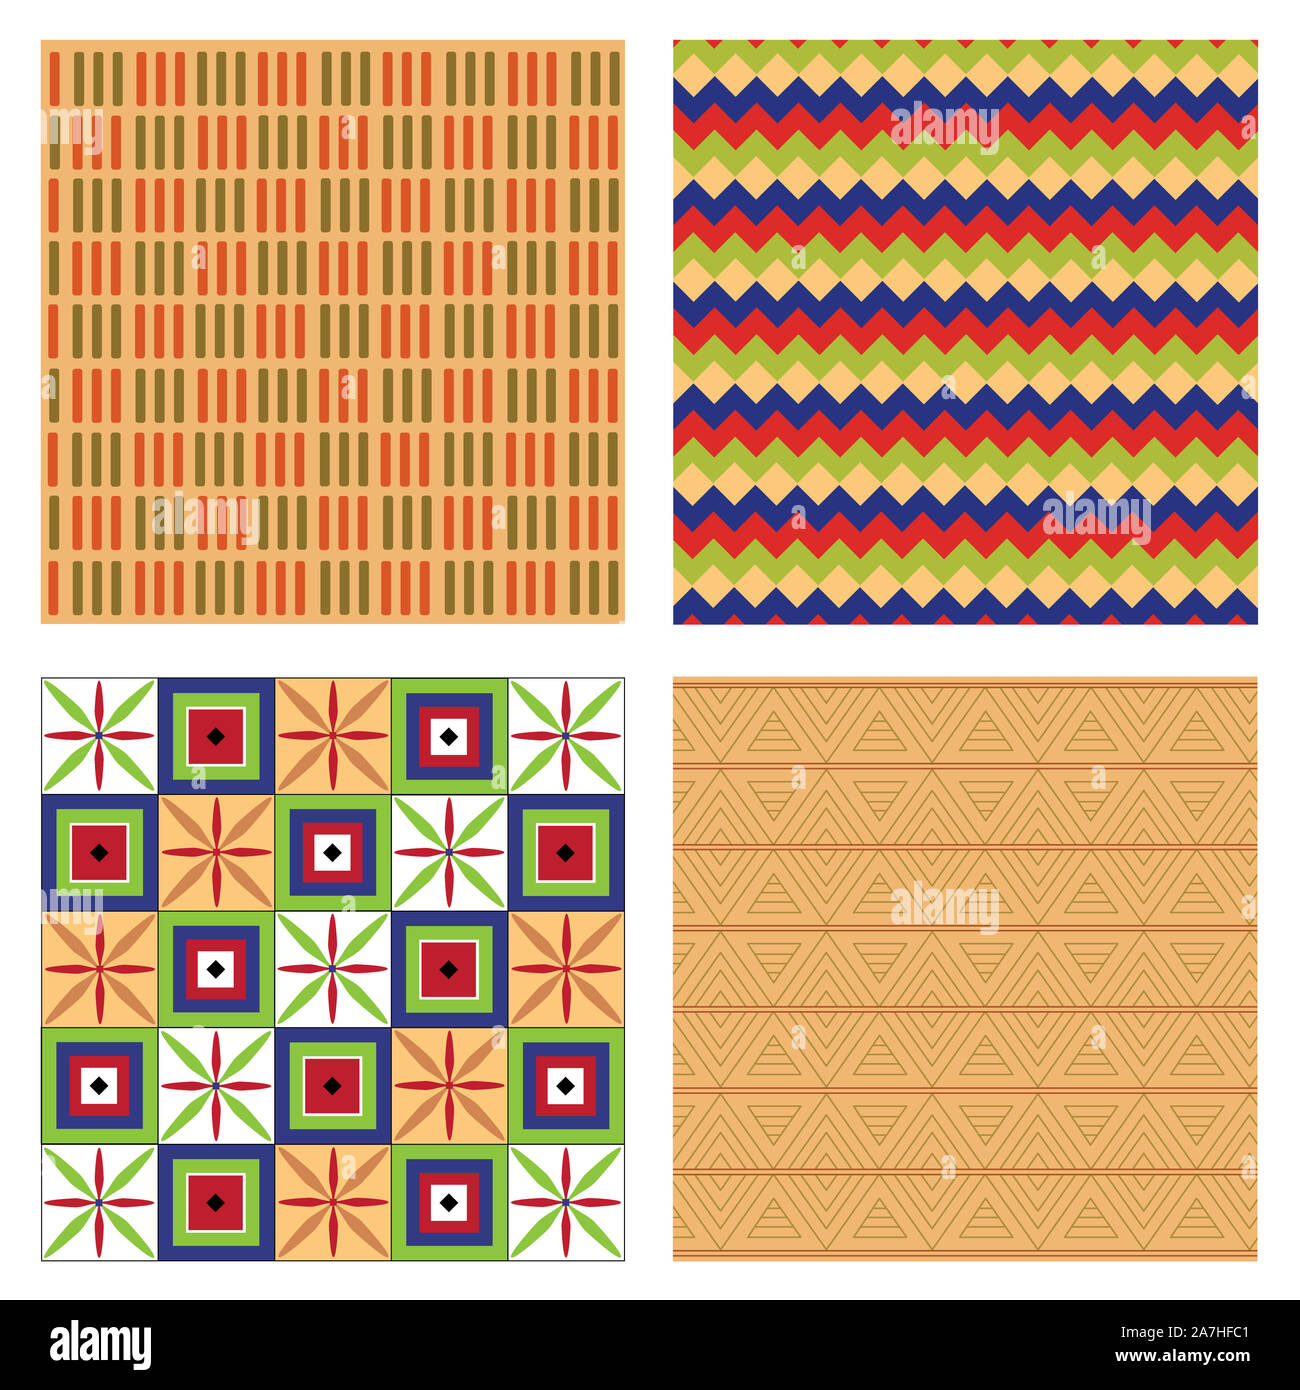 Egypt national ornament pattern volume 2. Egyptian decorative textile elements background. African culture fabric design. Stock Photo